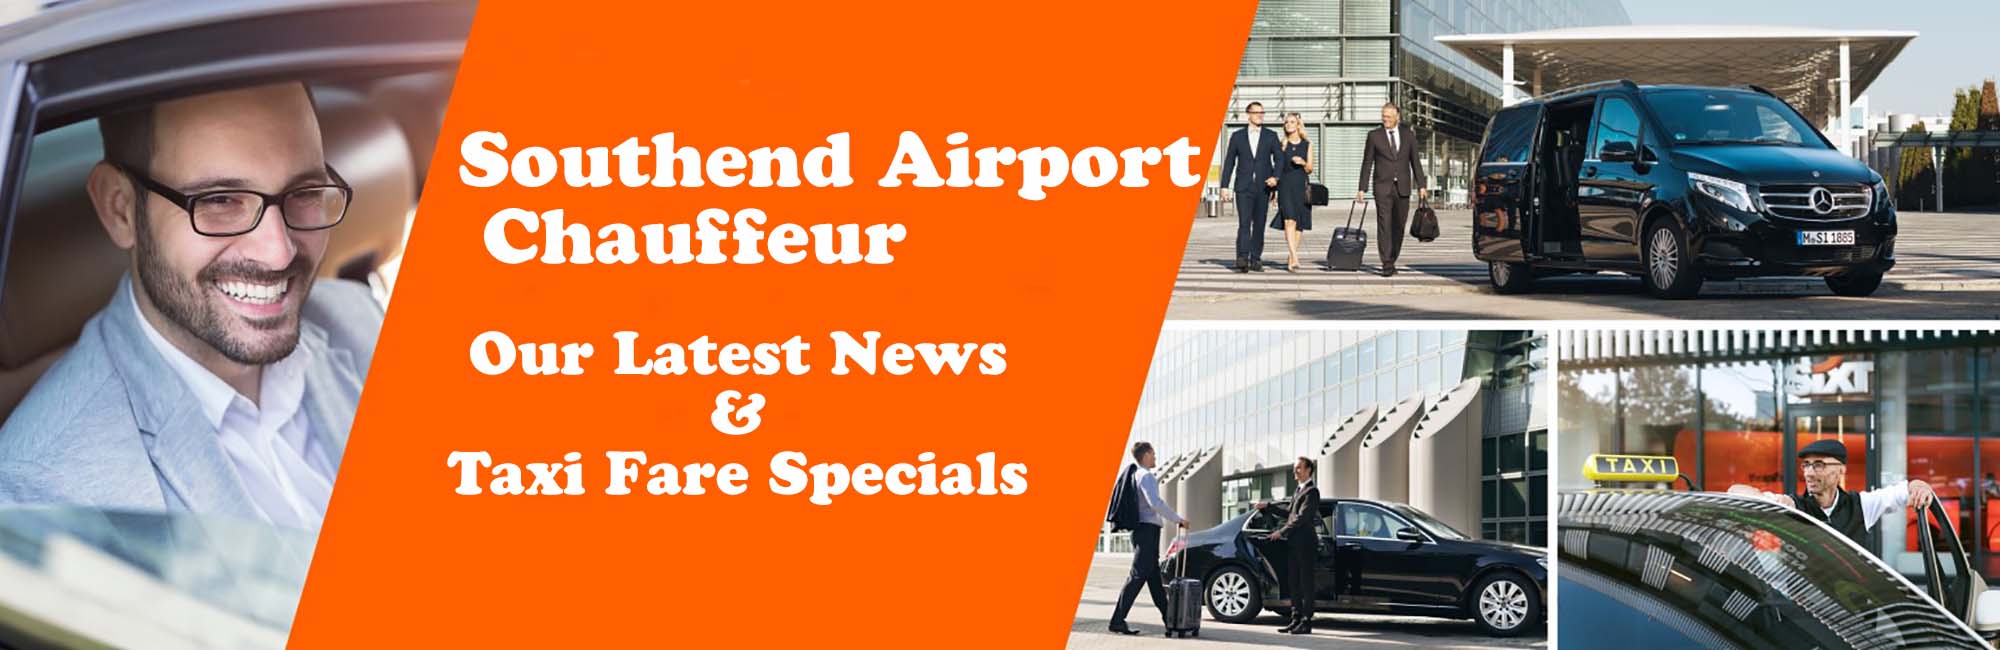 southend airport chauffeur latest news